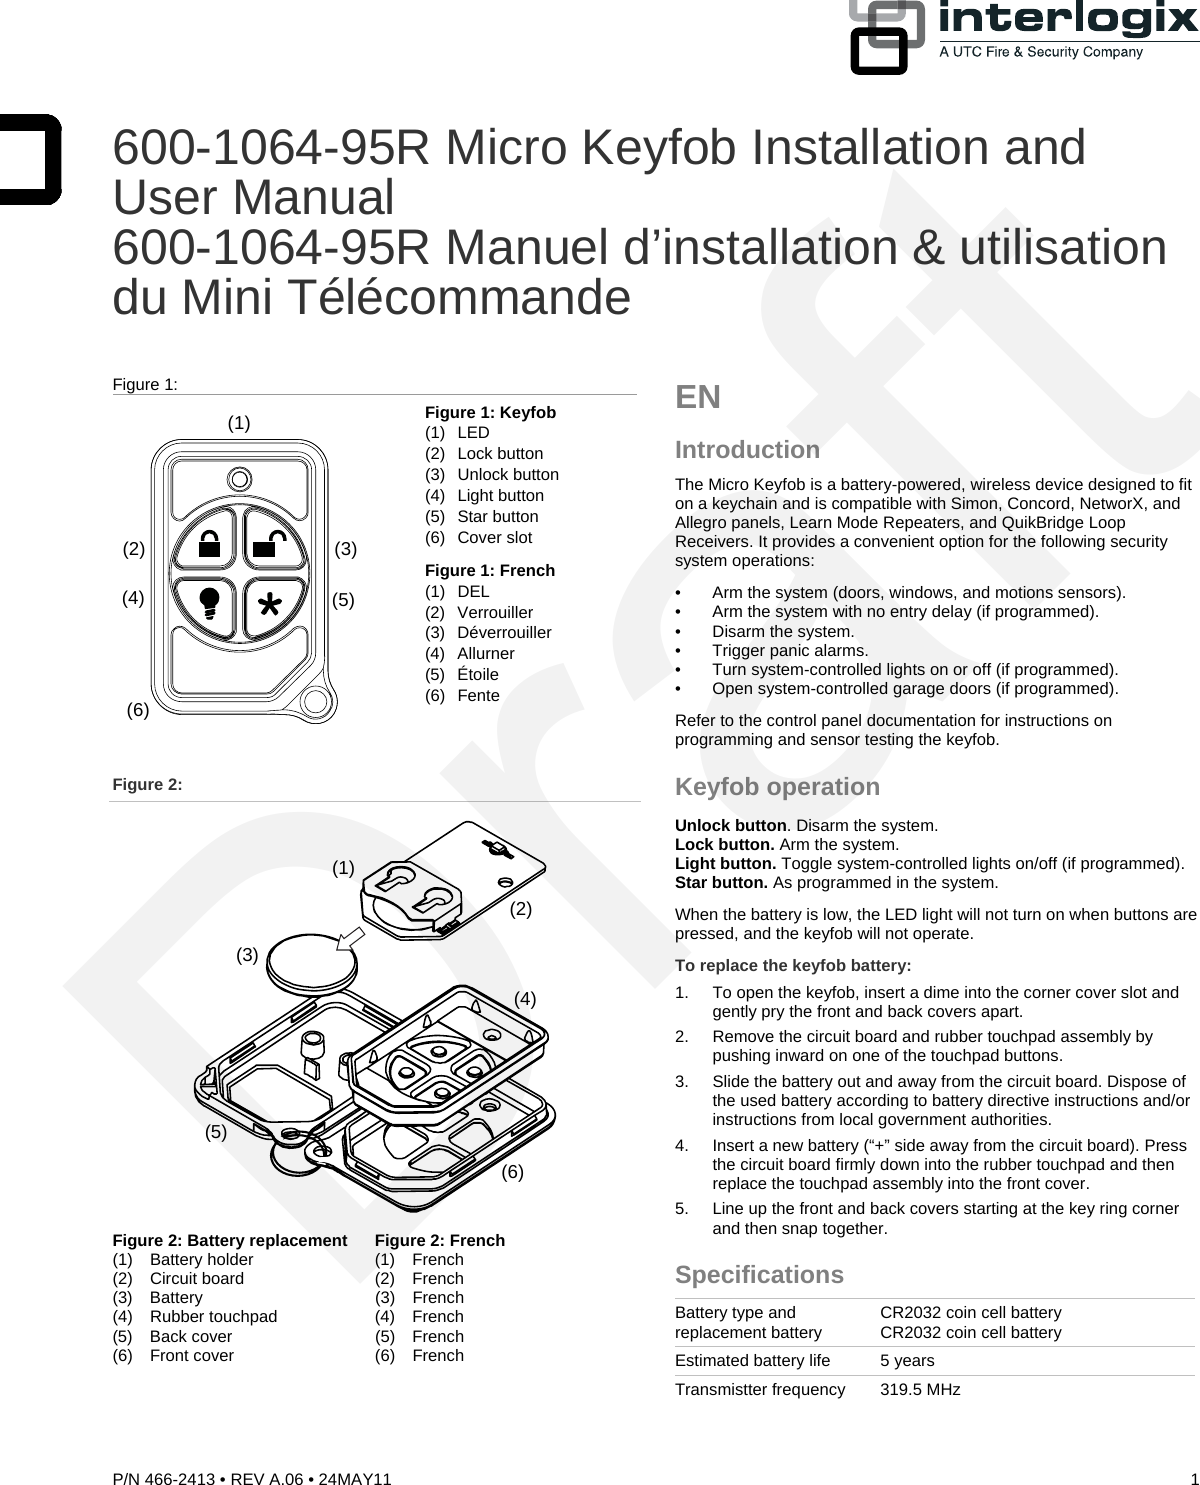  600-1064-95R Micro Keyfob Installation and User Manual 600-1064-95R Manuel d’installation &amp; utilisation du Mini Télécommande  Figure 1:  (1)(2)(4)(3)(5)(6) Figure 1: Keyfob  (1) LED    (2) Lock button (3) Unlock button (4) Light button (5) Star button (6) Cover slot Figure 1: French   (1) DEL    (2) Verrouiller (3) Déverrouiller  (4) Allurner (5) Étoile  (6) Fente  Figure 2:  (3)(2)(1)(4)(6)(5) Figure 2: Battery replacement  Figure 2: French (1) Battery holder    (1) French  (2) Circuit board    (2) French  (3) Battery     (3) French  (4) Rubber touchpad   (4) French  (5) Back cover    (5) French (6) Front cover    (6) French    EN  Introduction The Micro Keyfob is a battery-powered, wireless device designed to fit on a keychain and is compatible with Simon, Concord, NetworX, and Allegro panels, Learn Mode Repeaters, and QuikBridge Loop Receivers. It provides a convenient option for the following security system operations: •  Arm the system (doors, windows, and motions sensors). •  Arm the system with no entry delay (if programmed). •  Disarm the system. • Trigger panic alarms. •  Turn system-controlled lights on or off (if programmed). •  Open system-controlled garage doors (if programmed). Refer to the control panel documentation for instructions on programming and sensor testing the keyfob. Keyfob operation Unlock button. Disarm the system.  Lock button. Arm the system. Light button. Toggle system-controlled lights on/off (if programmed). Star button. As programmed in the system. When the battery is low, the LED light will not turn on when buttons are pressed, and the keyfob will not operate. To replace the keyfob battery: 1.  To open the keyfob, insert a dime into the corner cover slot and gently pry the front and back covers apart. 2.  Remove the circuit board and rubber touchpad assembly by pushing inward on one of the touchpad buttons.  3.  Slide the battery out and away from the circuit board. Dispose of the used battery according to battery directive instructions and/or instructions from local government authorities. 4.  Insert a new battery (“+” side away from the circuit board). Press the circuit board firmly down into the rubber touchpad and then replace the touchpad assembly into the front cover. 5.  Line up the front and back covers starting at the key ring corner and then snap together. Specifications Battery type and replacement battery  CR2032 coin cell battery CR2032 coin cell battery Estimated battery life  5 years Transmistter frequency  319.5 MHz P/N 466-2413 • REV A.06 • 24MAY11  1 Draft